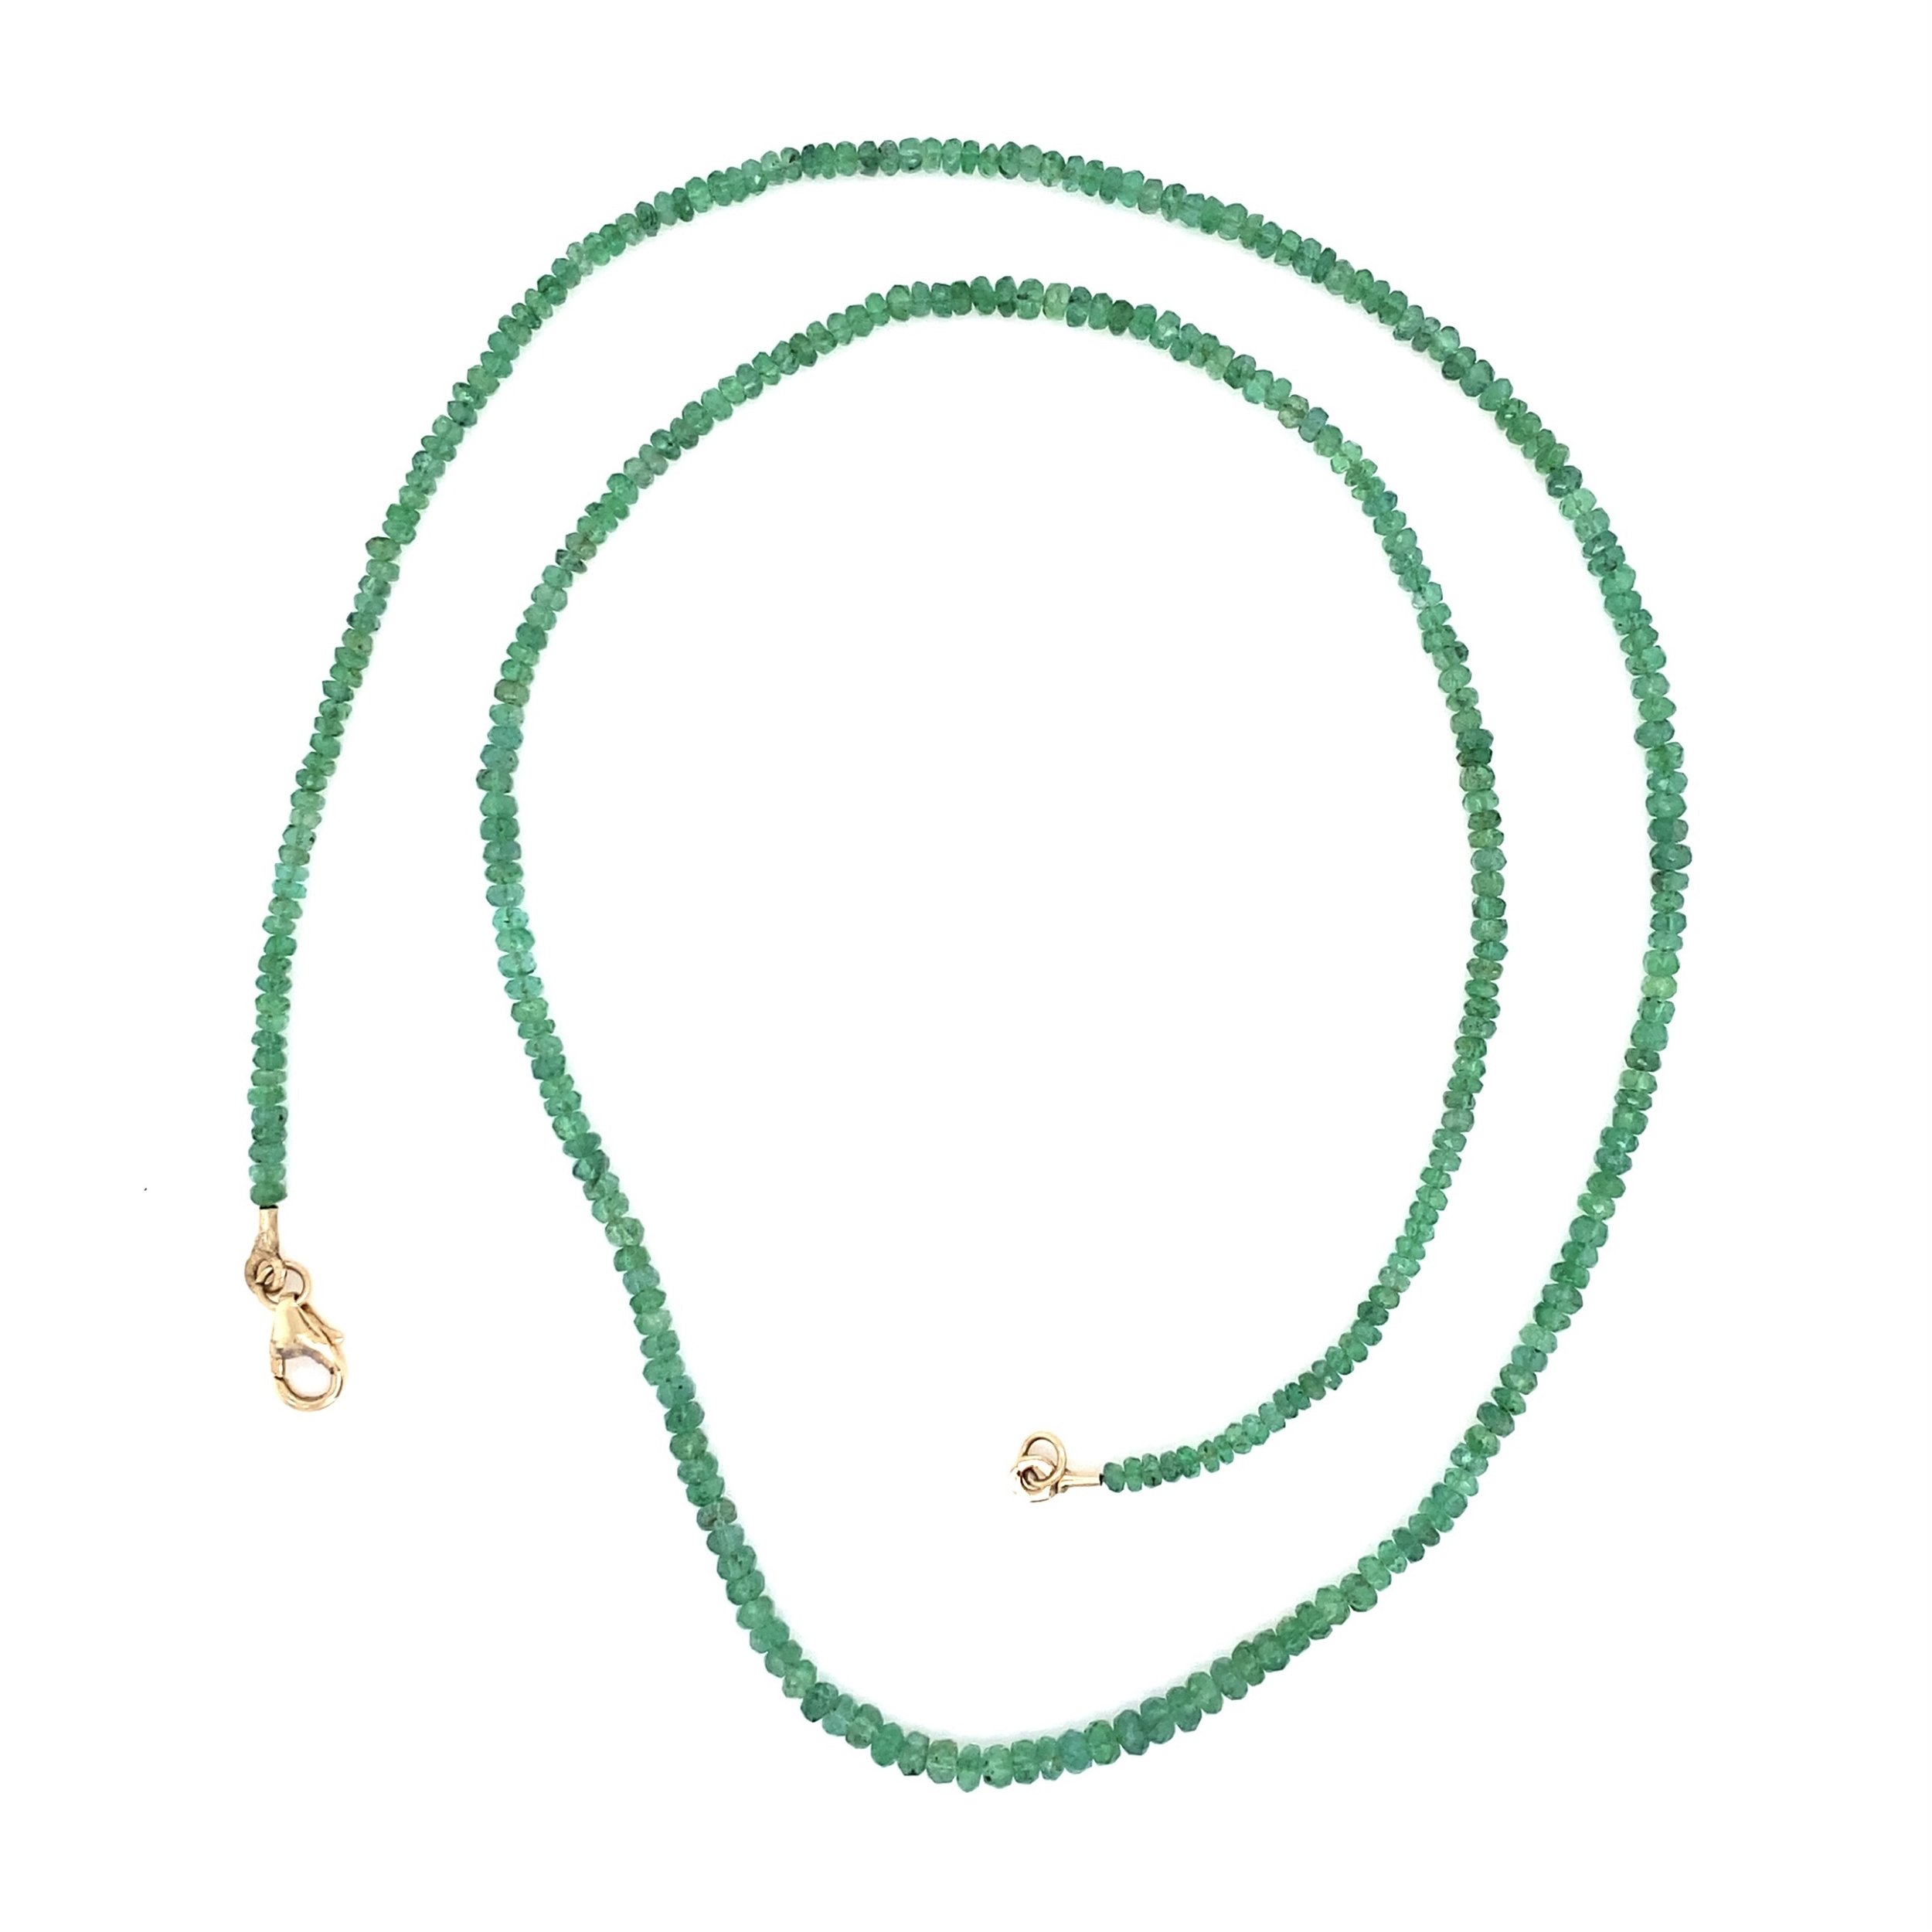 14K YG 3mm Faceted Emerald Bead Necklace 5.4g, 20"